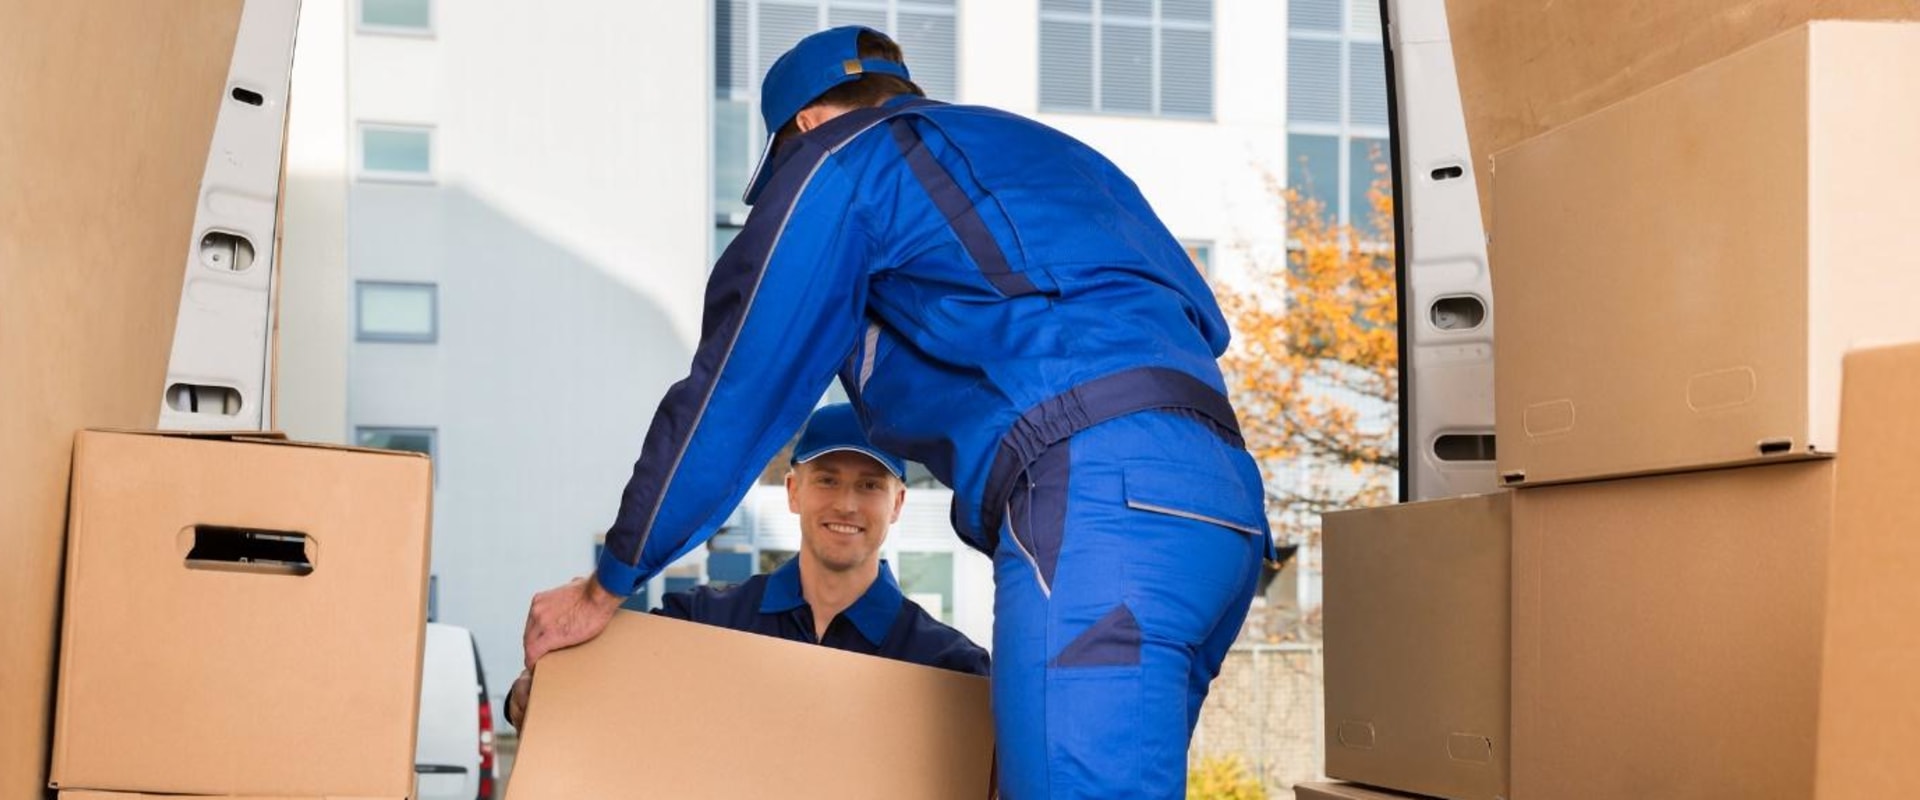 How To Find Reputable Moving Companies